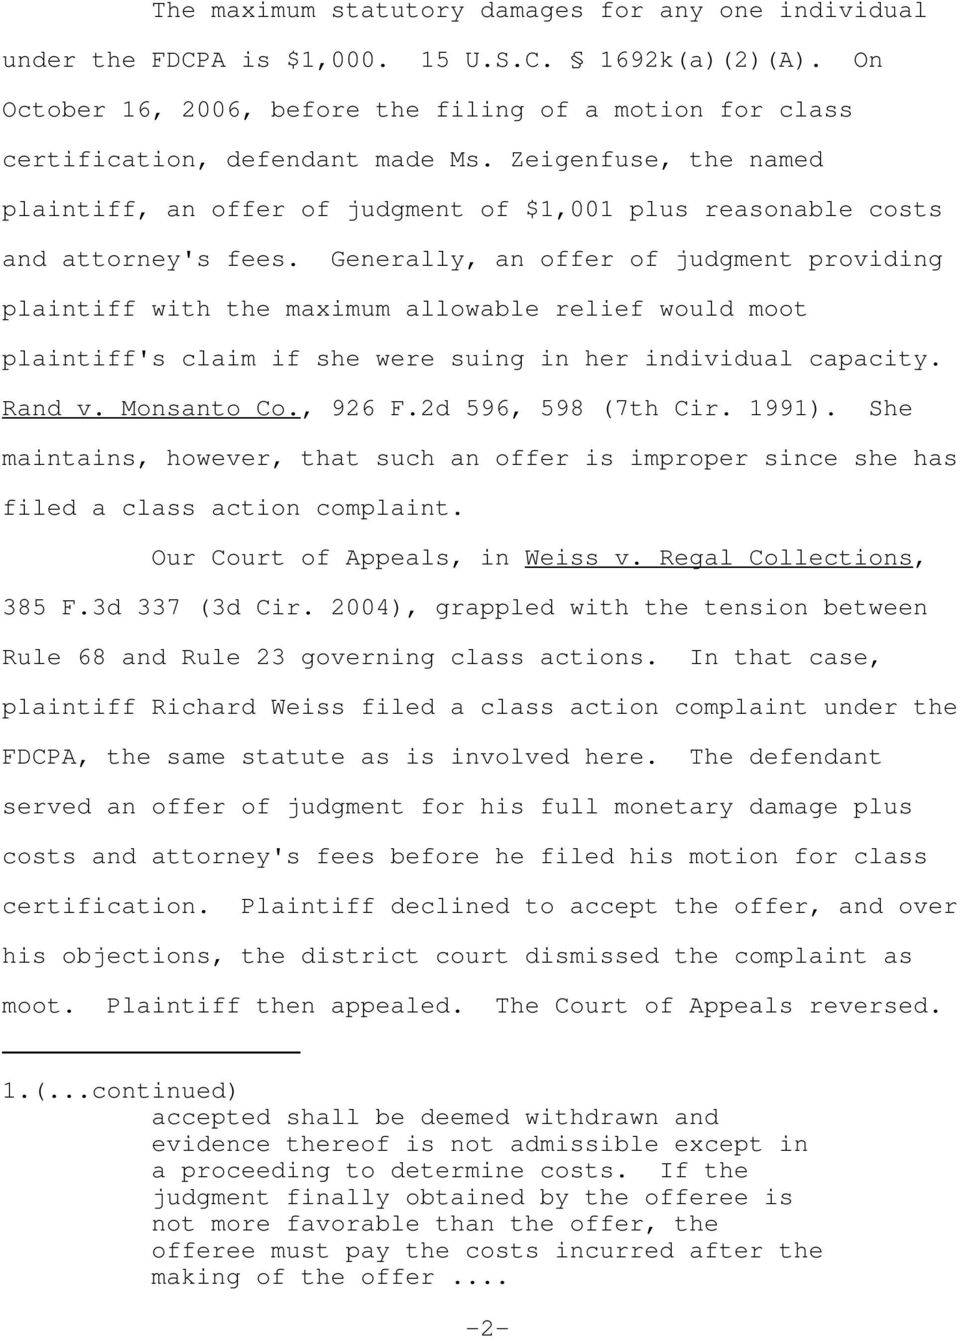 Generally, an offer of judgment providing plaintiff with the maximum allowable relief would moot plaintiff's claim if she were suing in her individual capacity. Rand v. Monsanto Co., 926 F.